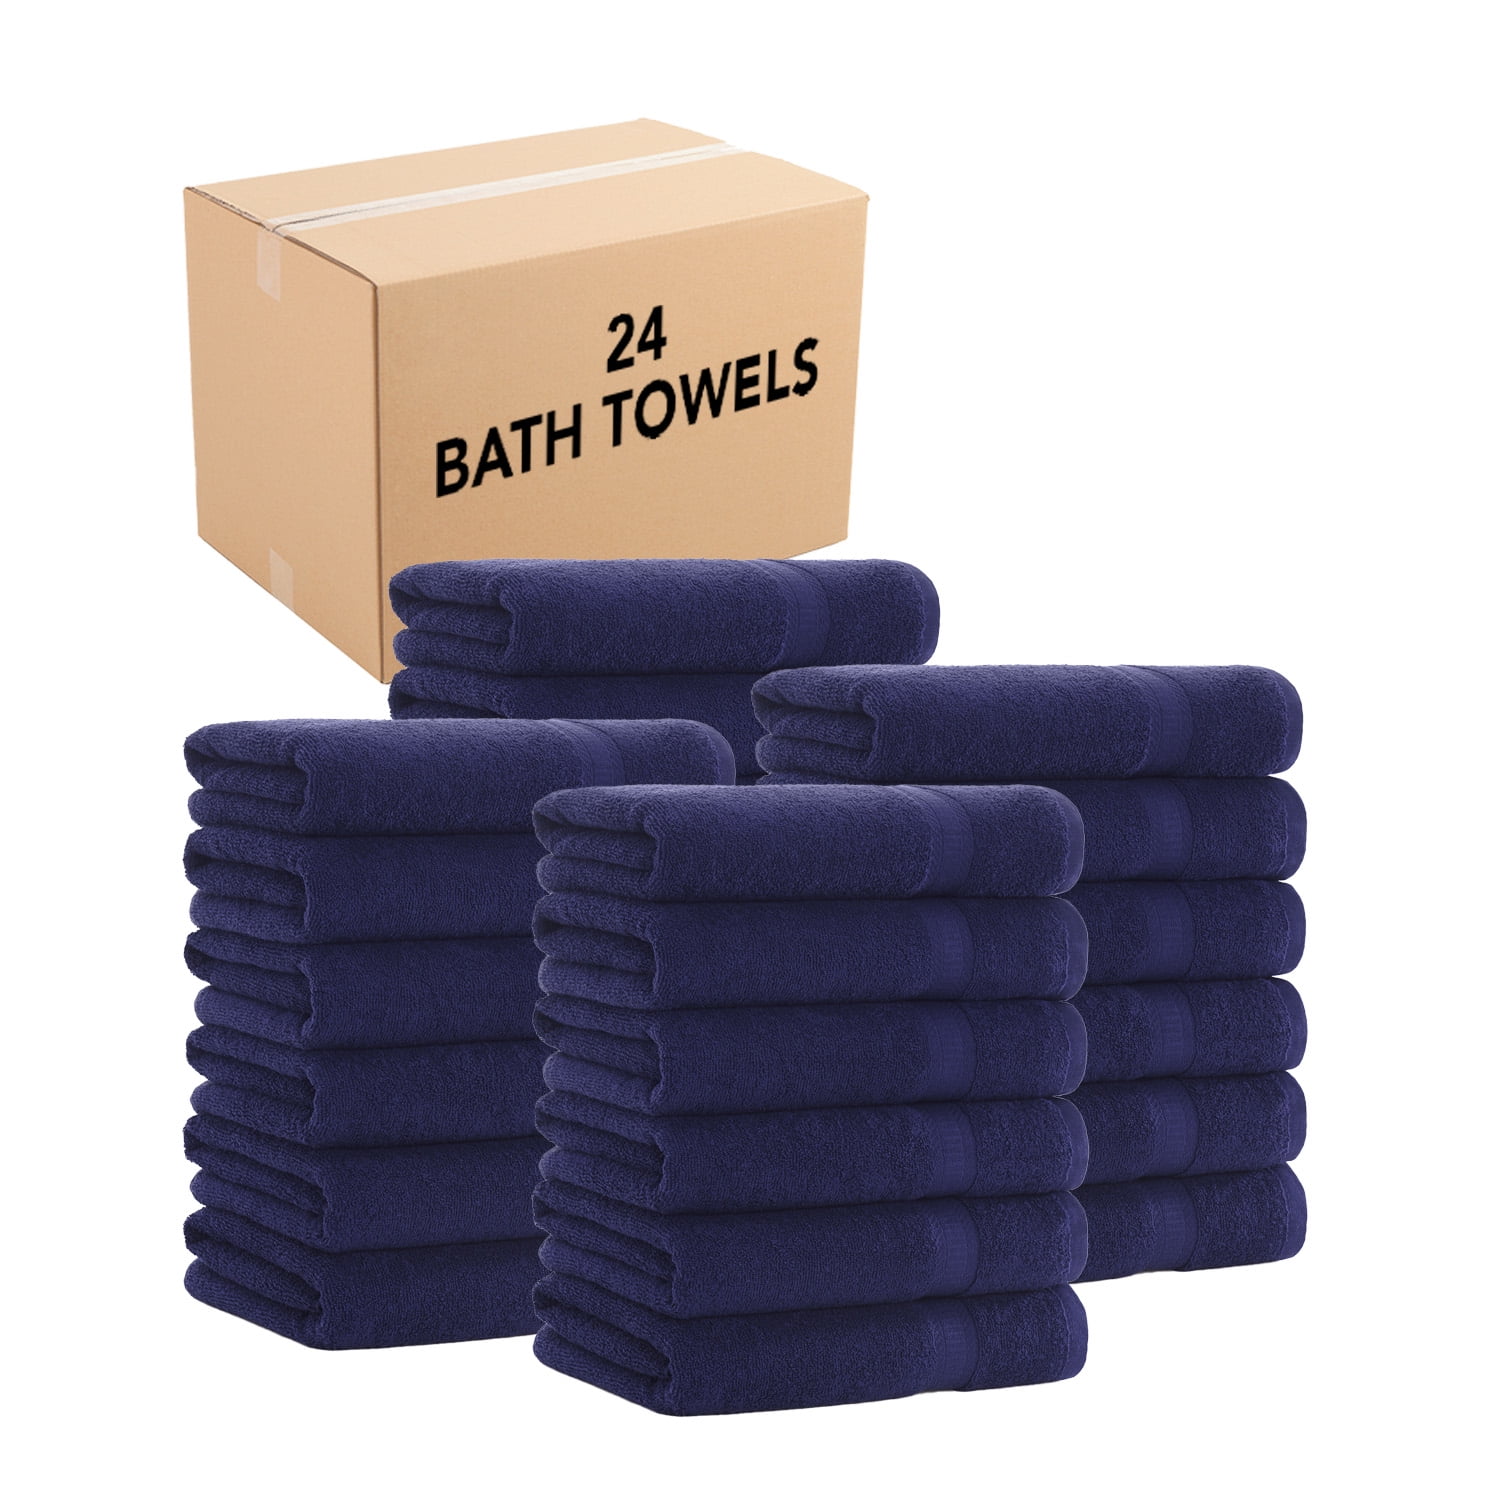 Luxury Thick Bath Towels 19.7 x 39.4 Premium Bath Sheet/Ultra Soft,  Highly Absorbent Heavy Weight Combed Cotton (Navy Blue)